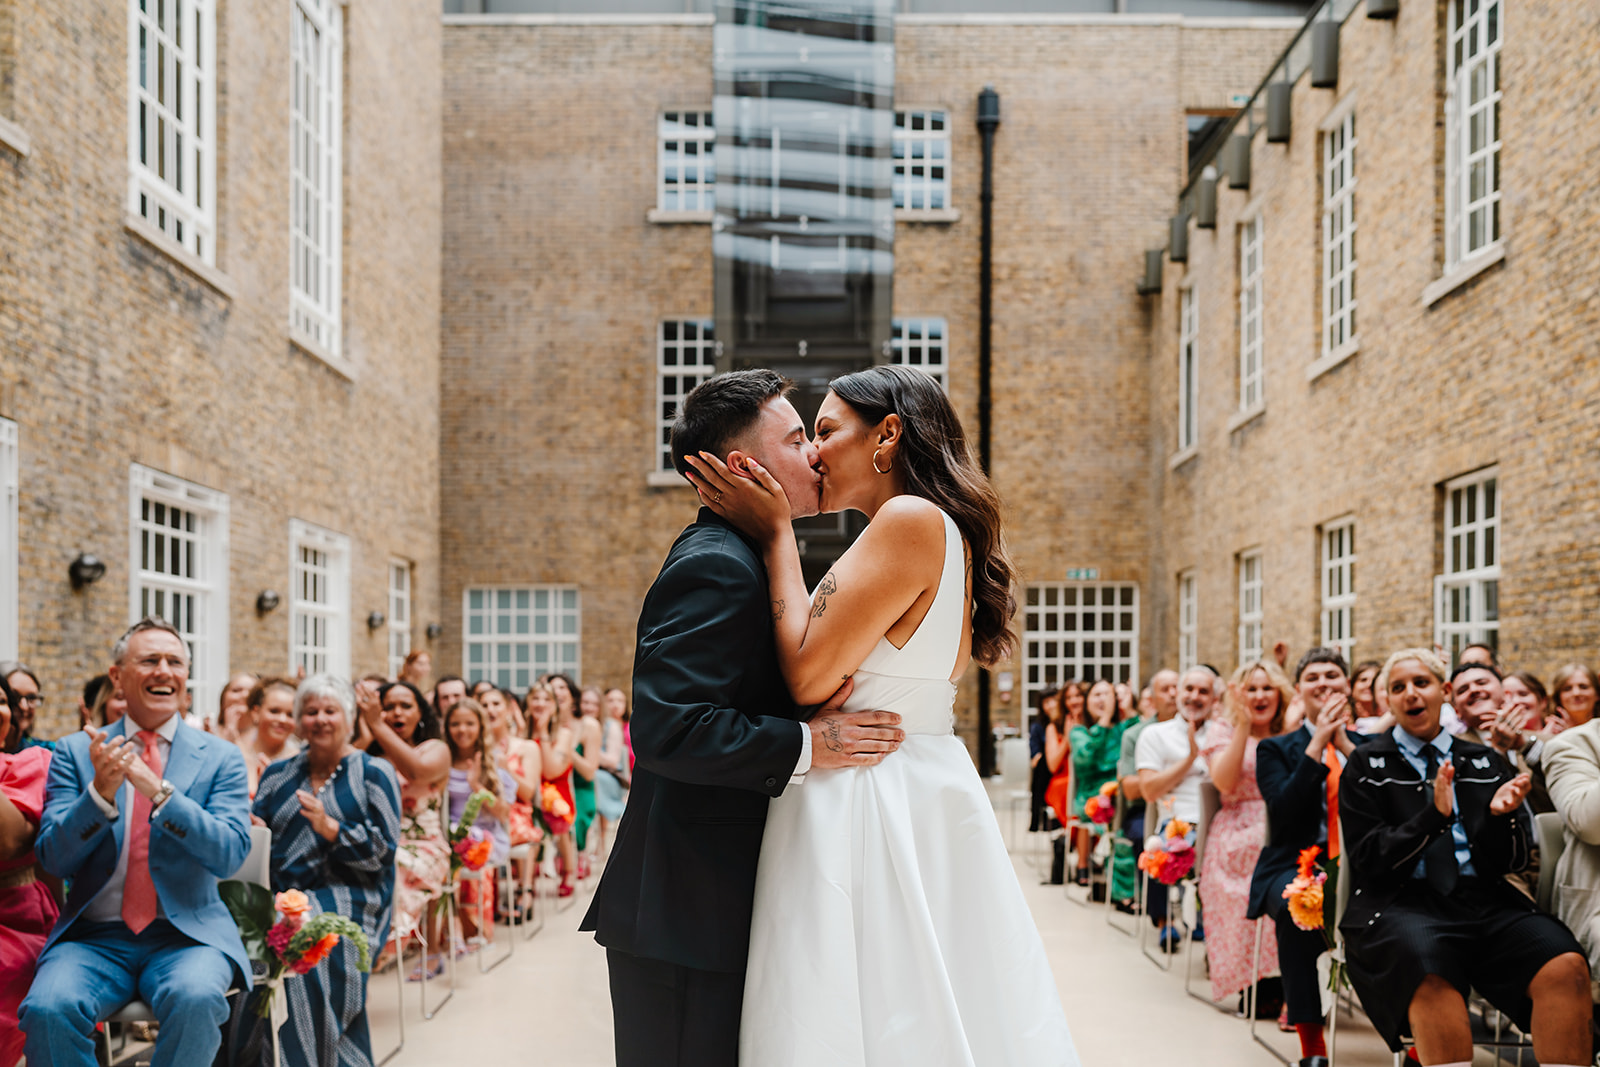 LGBTQ wedding at Hackney Town Hall with colourful, bold florals